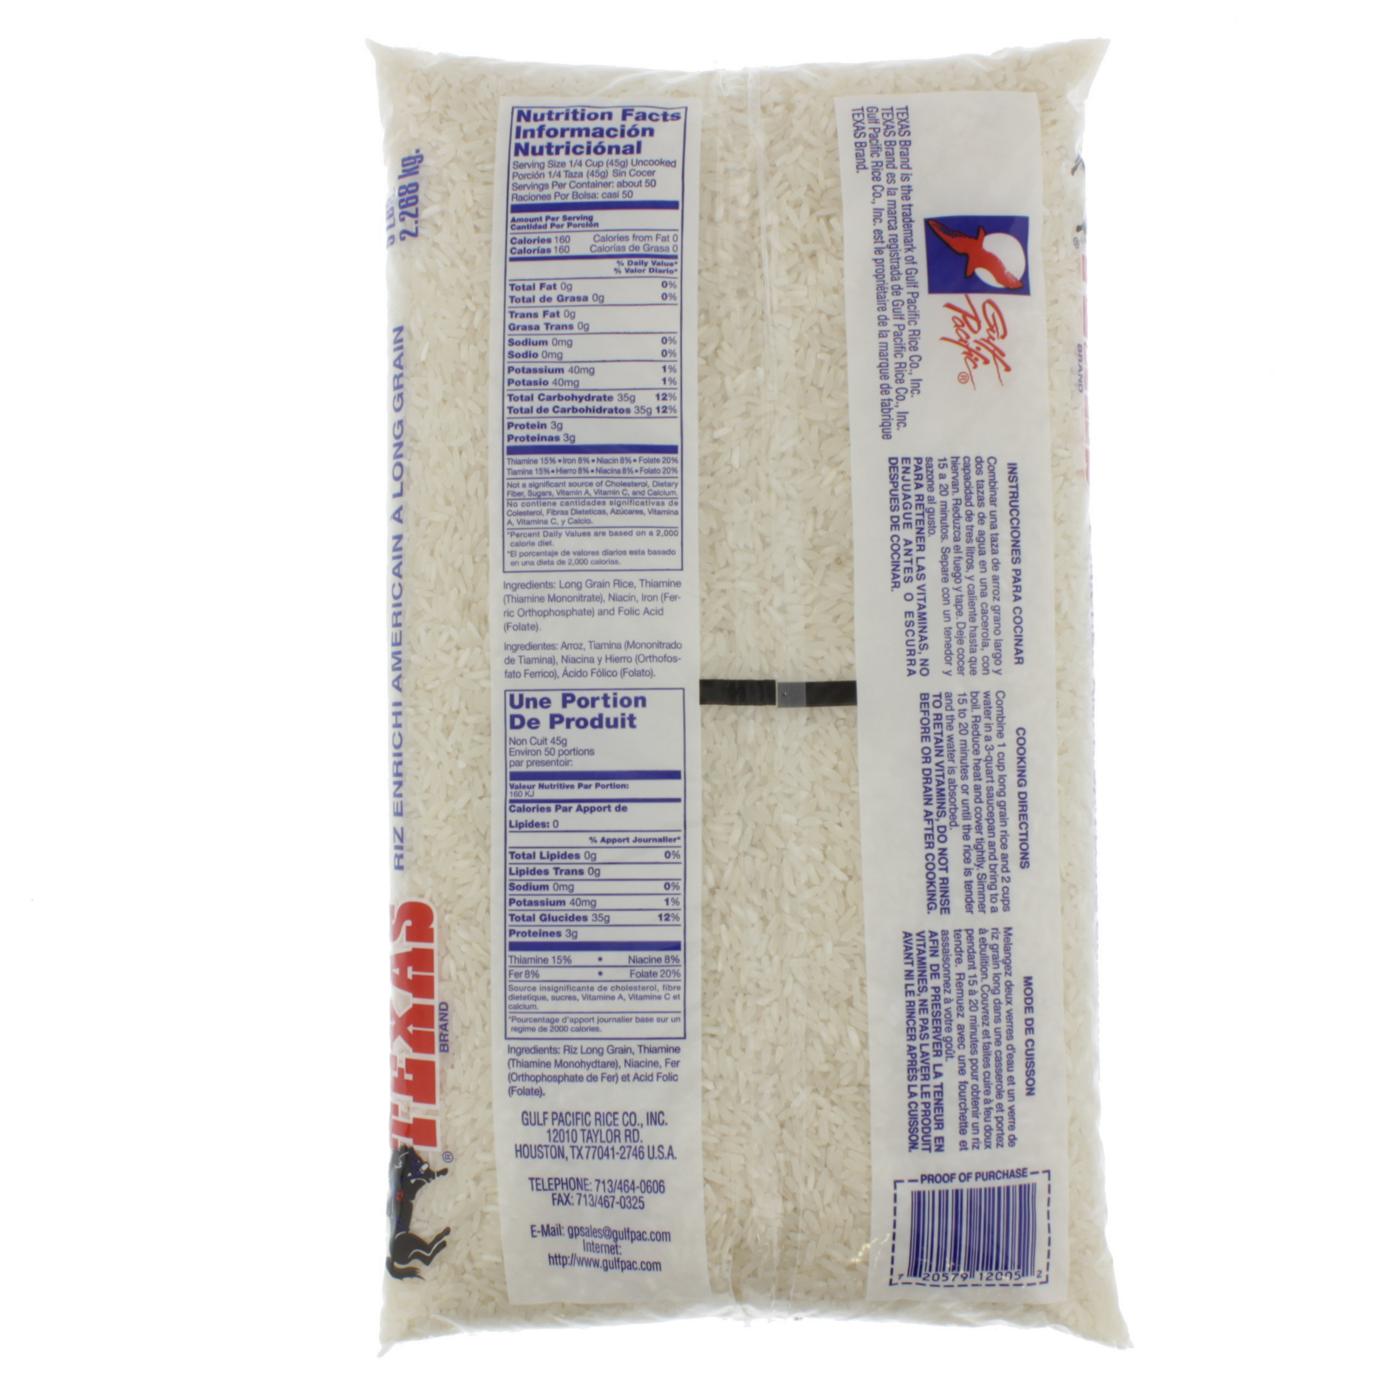 Texas Brand Enriched American Long Grain White Rice; image 2 of 2